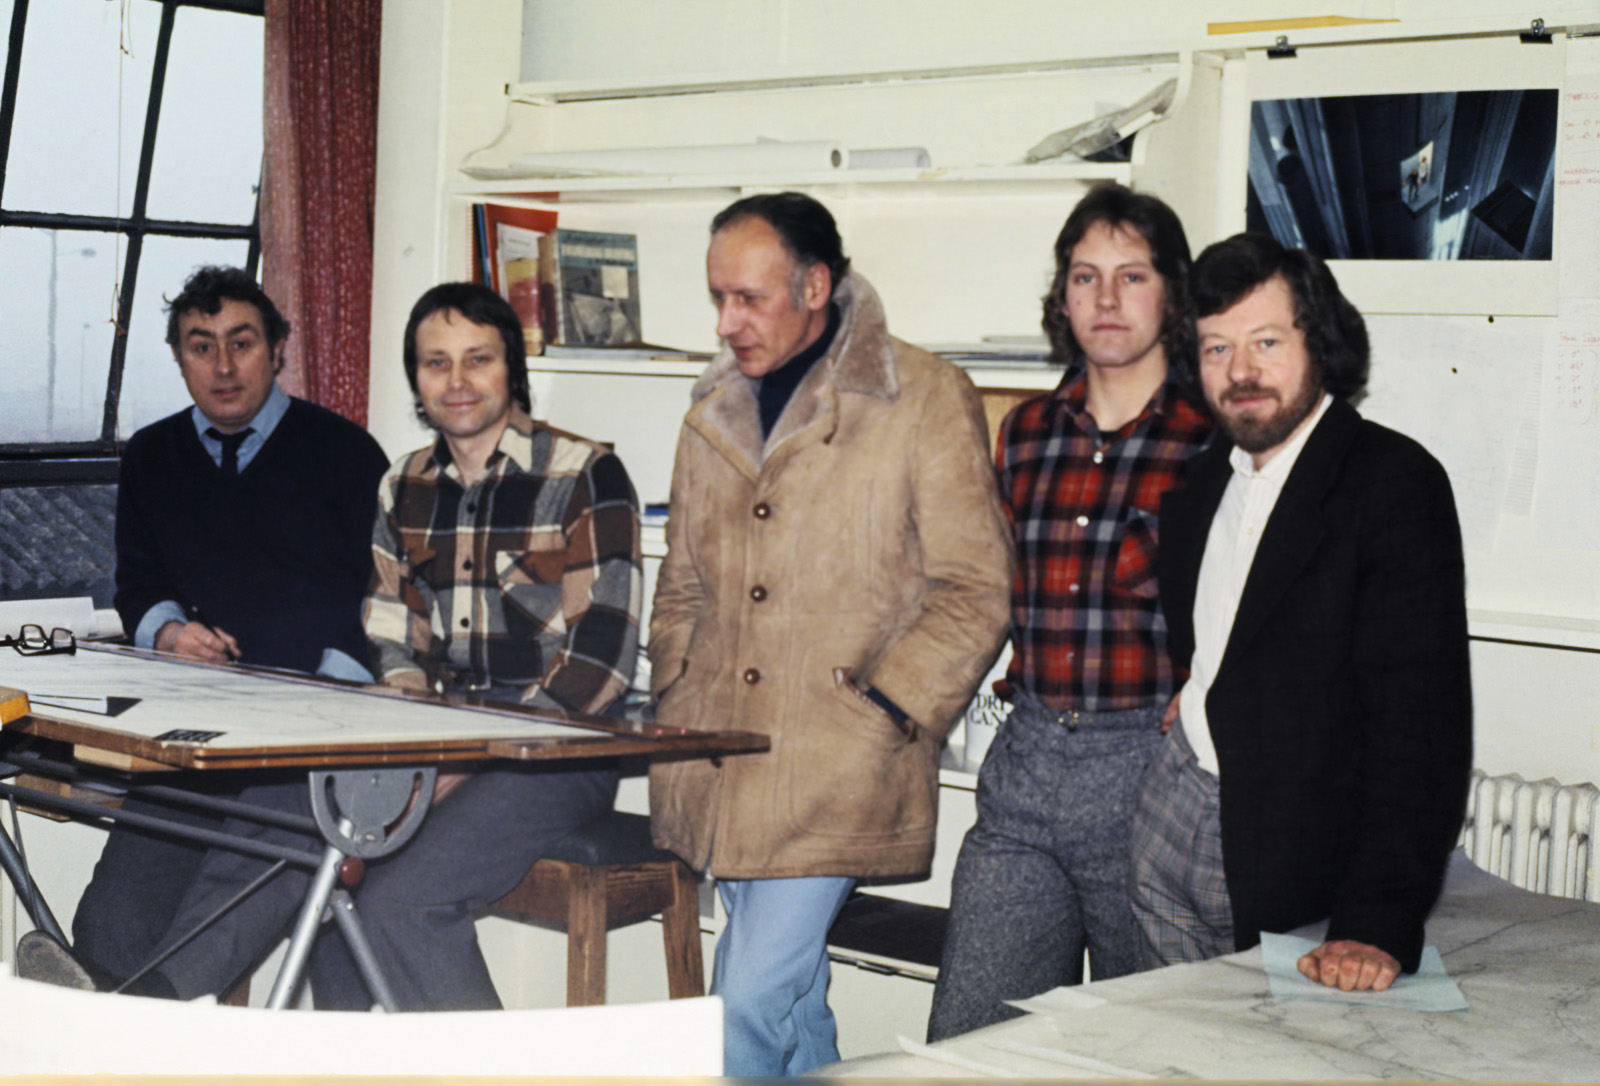 1976. with Peter childs Harry Lang. Steve Cooper,Ted Ambrose. Part of The Star Wars Art Dept.